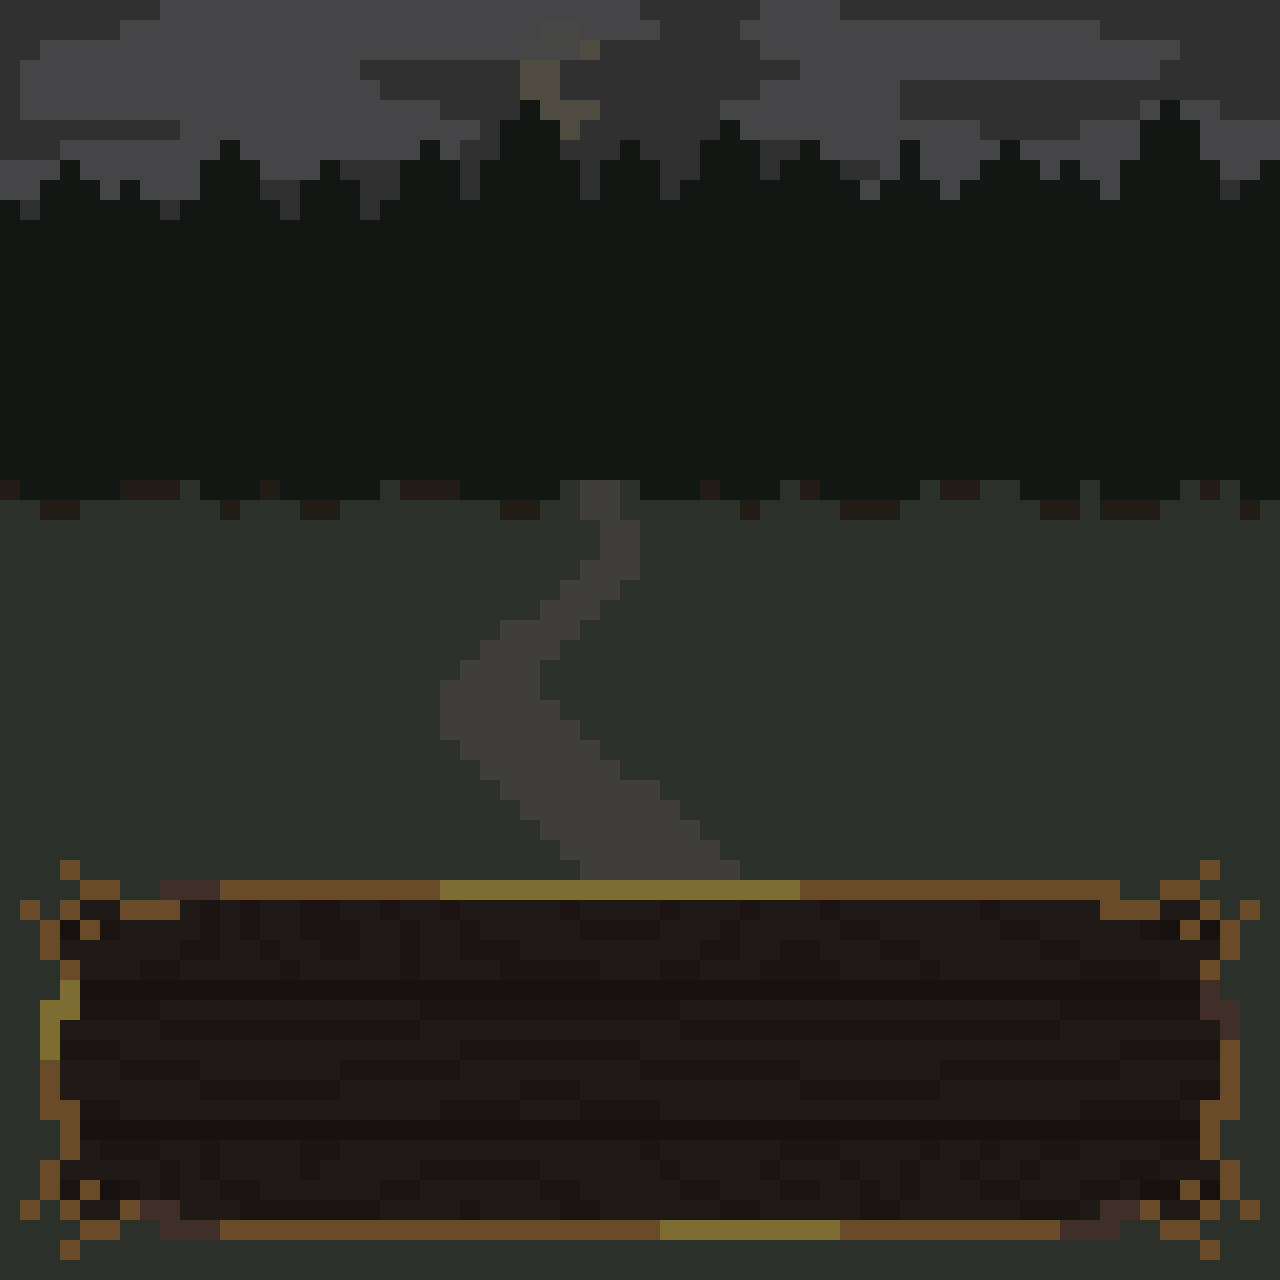 An immage of a winding path at night going into a forrest. there is a text box on the immage